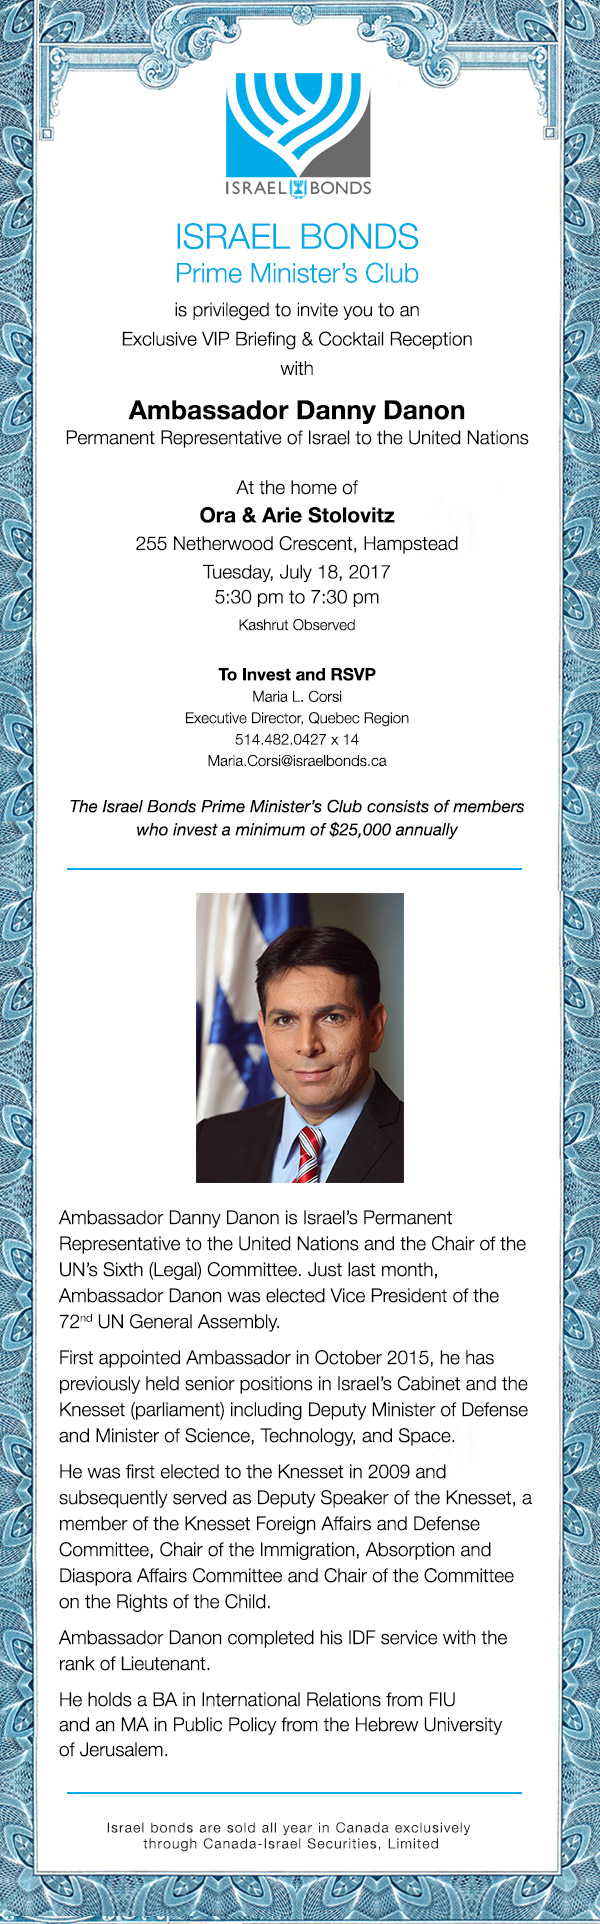 Israel Bonds is privileged to invite you to a VIP Briefing with Ambassador Danny Danon Permanent Representative of Israel to the United Nations. At the home of Ora & Arie Stolovitz Tuesday July 18, 2017 5:30 pm to 7:30 pm